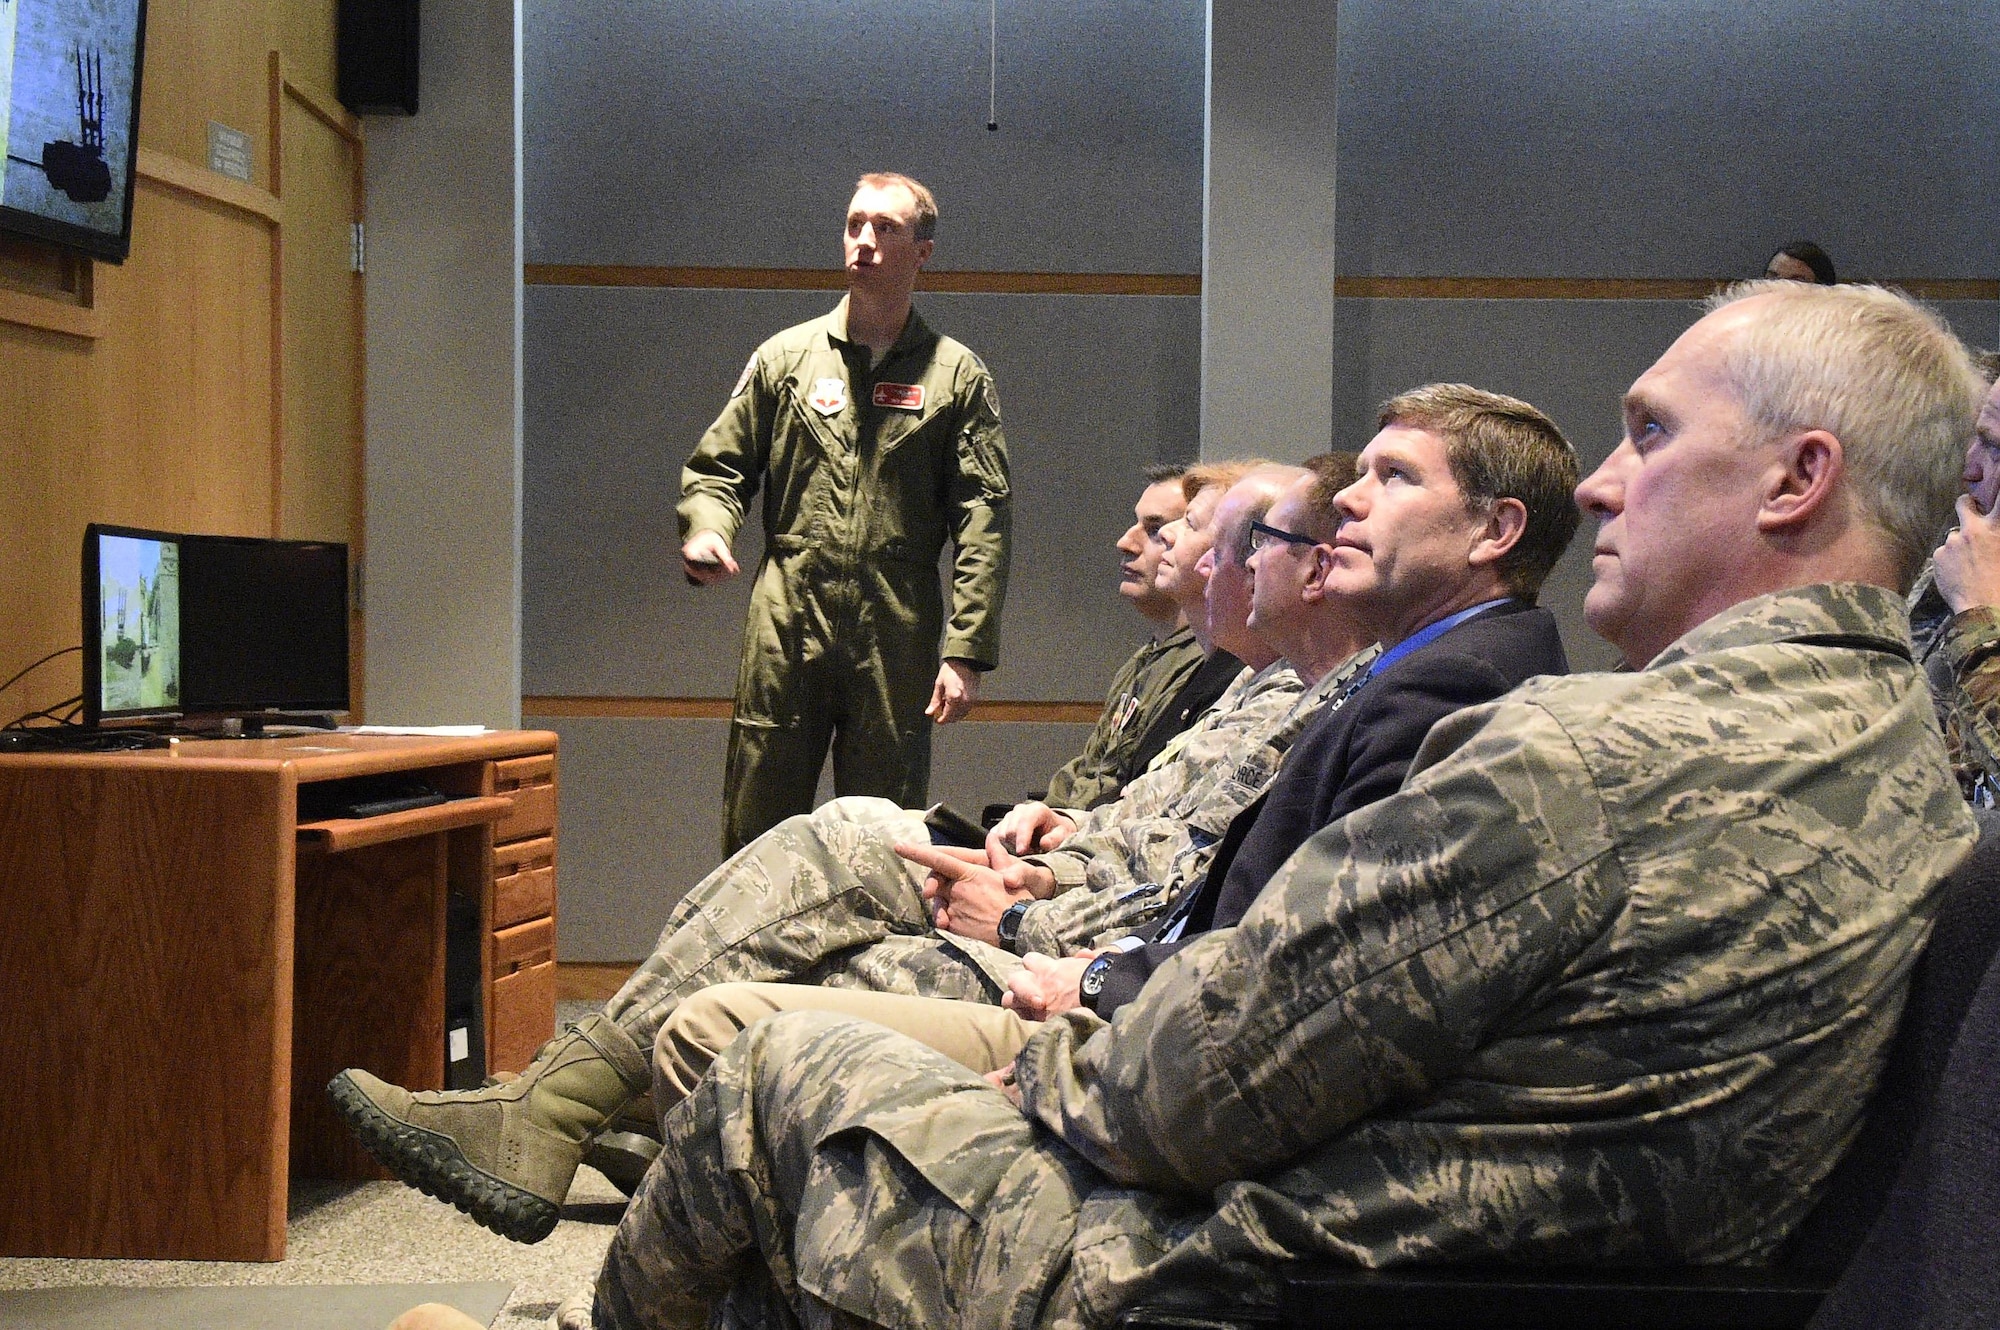 Lt. Col. Ben Gerds briefs distinguished visitors — including Gen. Joseph Lengyel, chief of the National Guard Bureau; U.S. Sen. Tammy Baldwin; and U.S. Rep. Ron Kind — during a May 5 visit to Volk Field Combat Readiness Training Center to observe Northern Lightning, an annual counterland training exercise that began May 1 and will end May 12. The exercise will involve aircraft and personnel from multiple active duty Air Force, National Guard and Navy. Northern Lightning is one of seven Air National Guard joint accredited exercises held at a Combat Readiness Training Center. The two-week long exercise will provide participating units a tactical level, joint training environment emphasizing user-defined objectives. Wisconsin Department of Military Affairs photo by Vaughn R. Larson